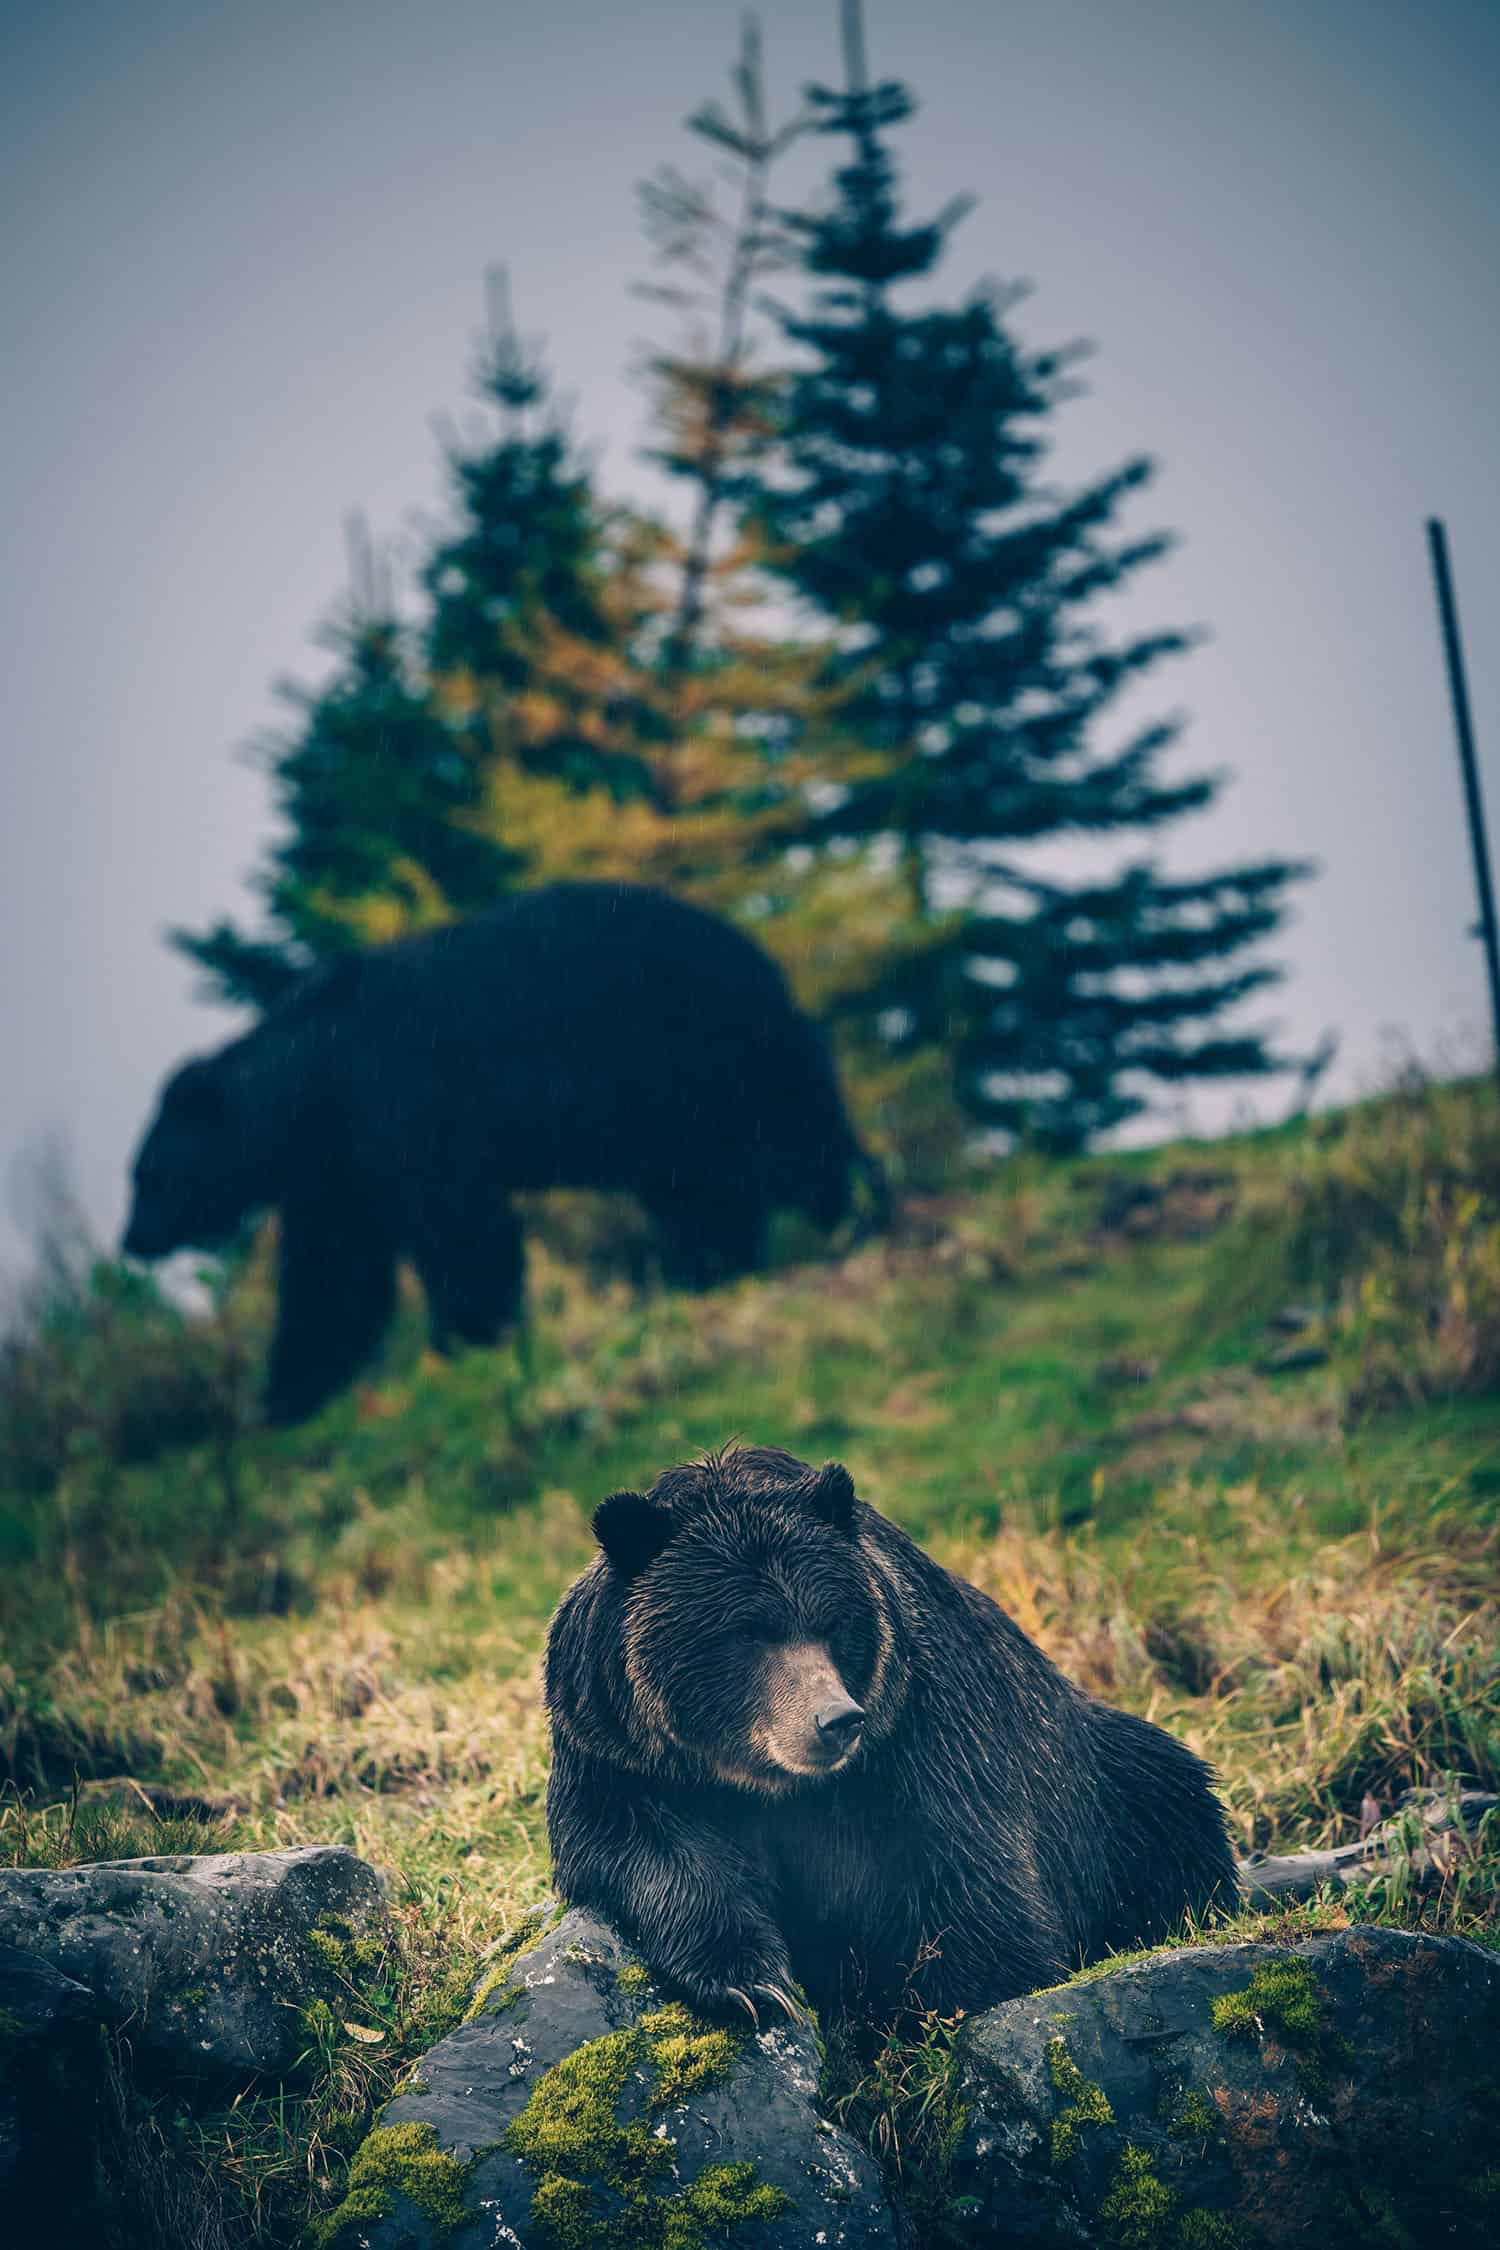 Two bears, one in the foreground sitting while the one in the background walks away